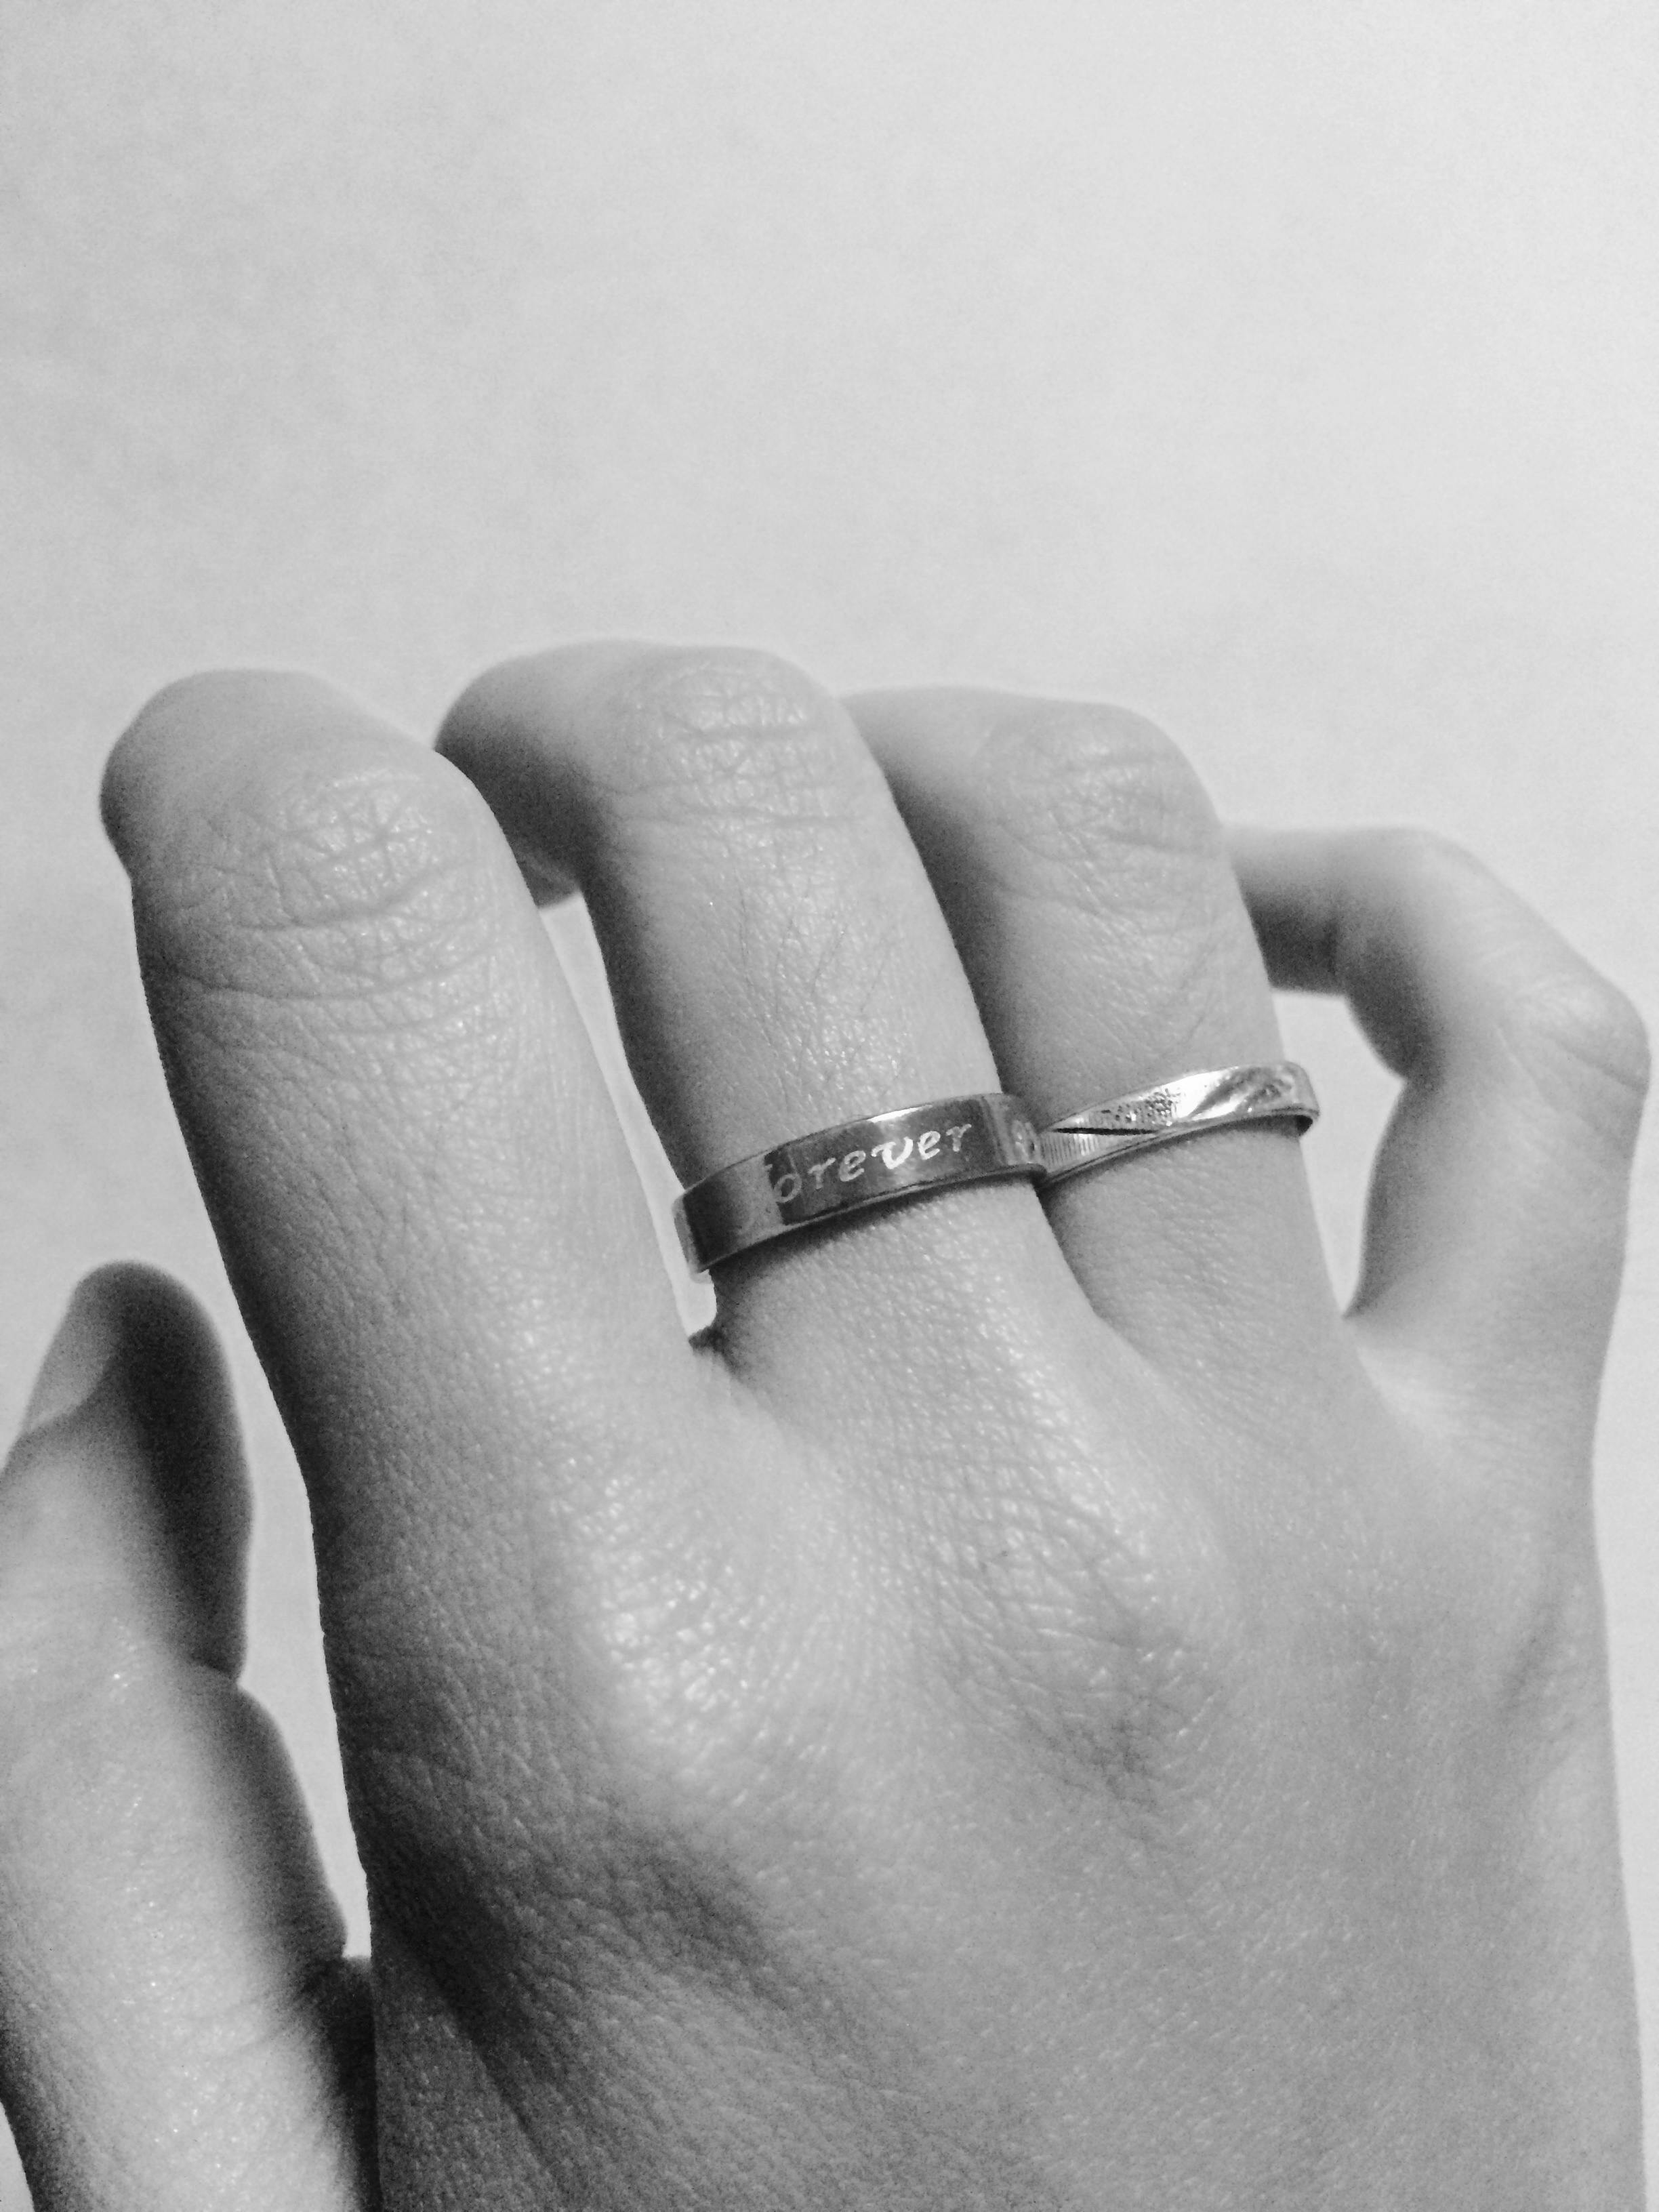 Free stock photo of pure, purity, purity ring